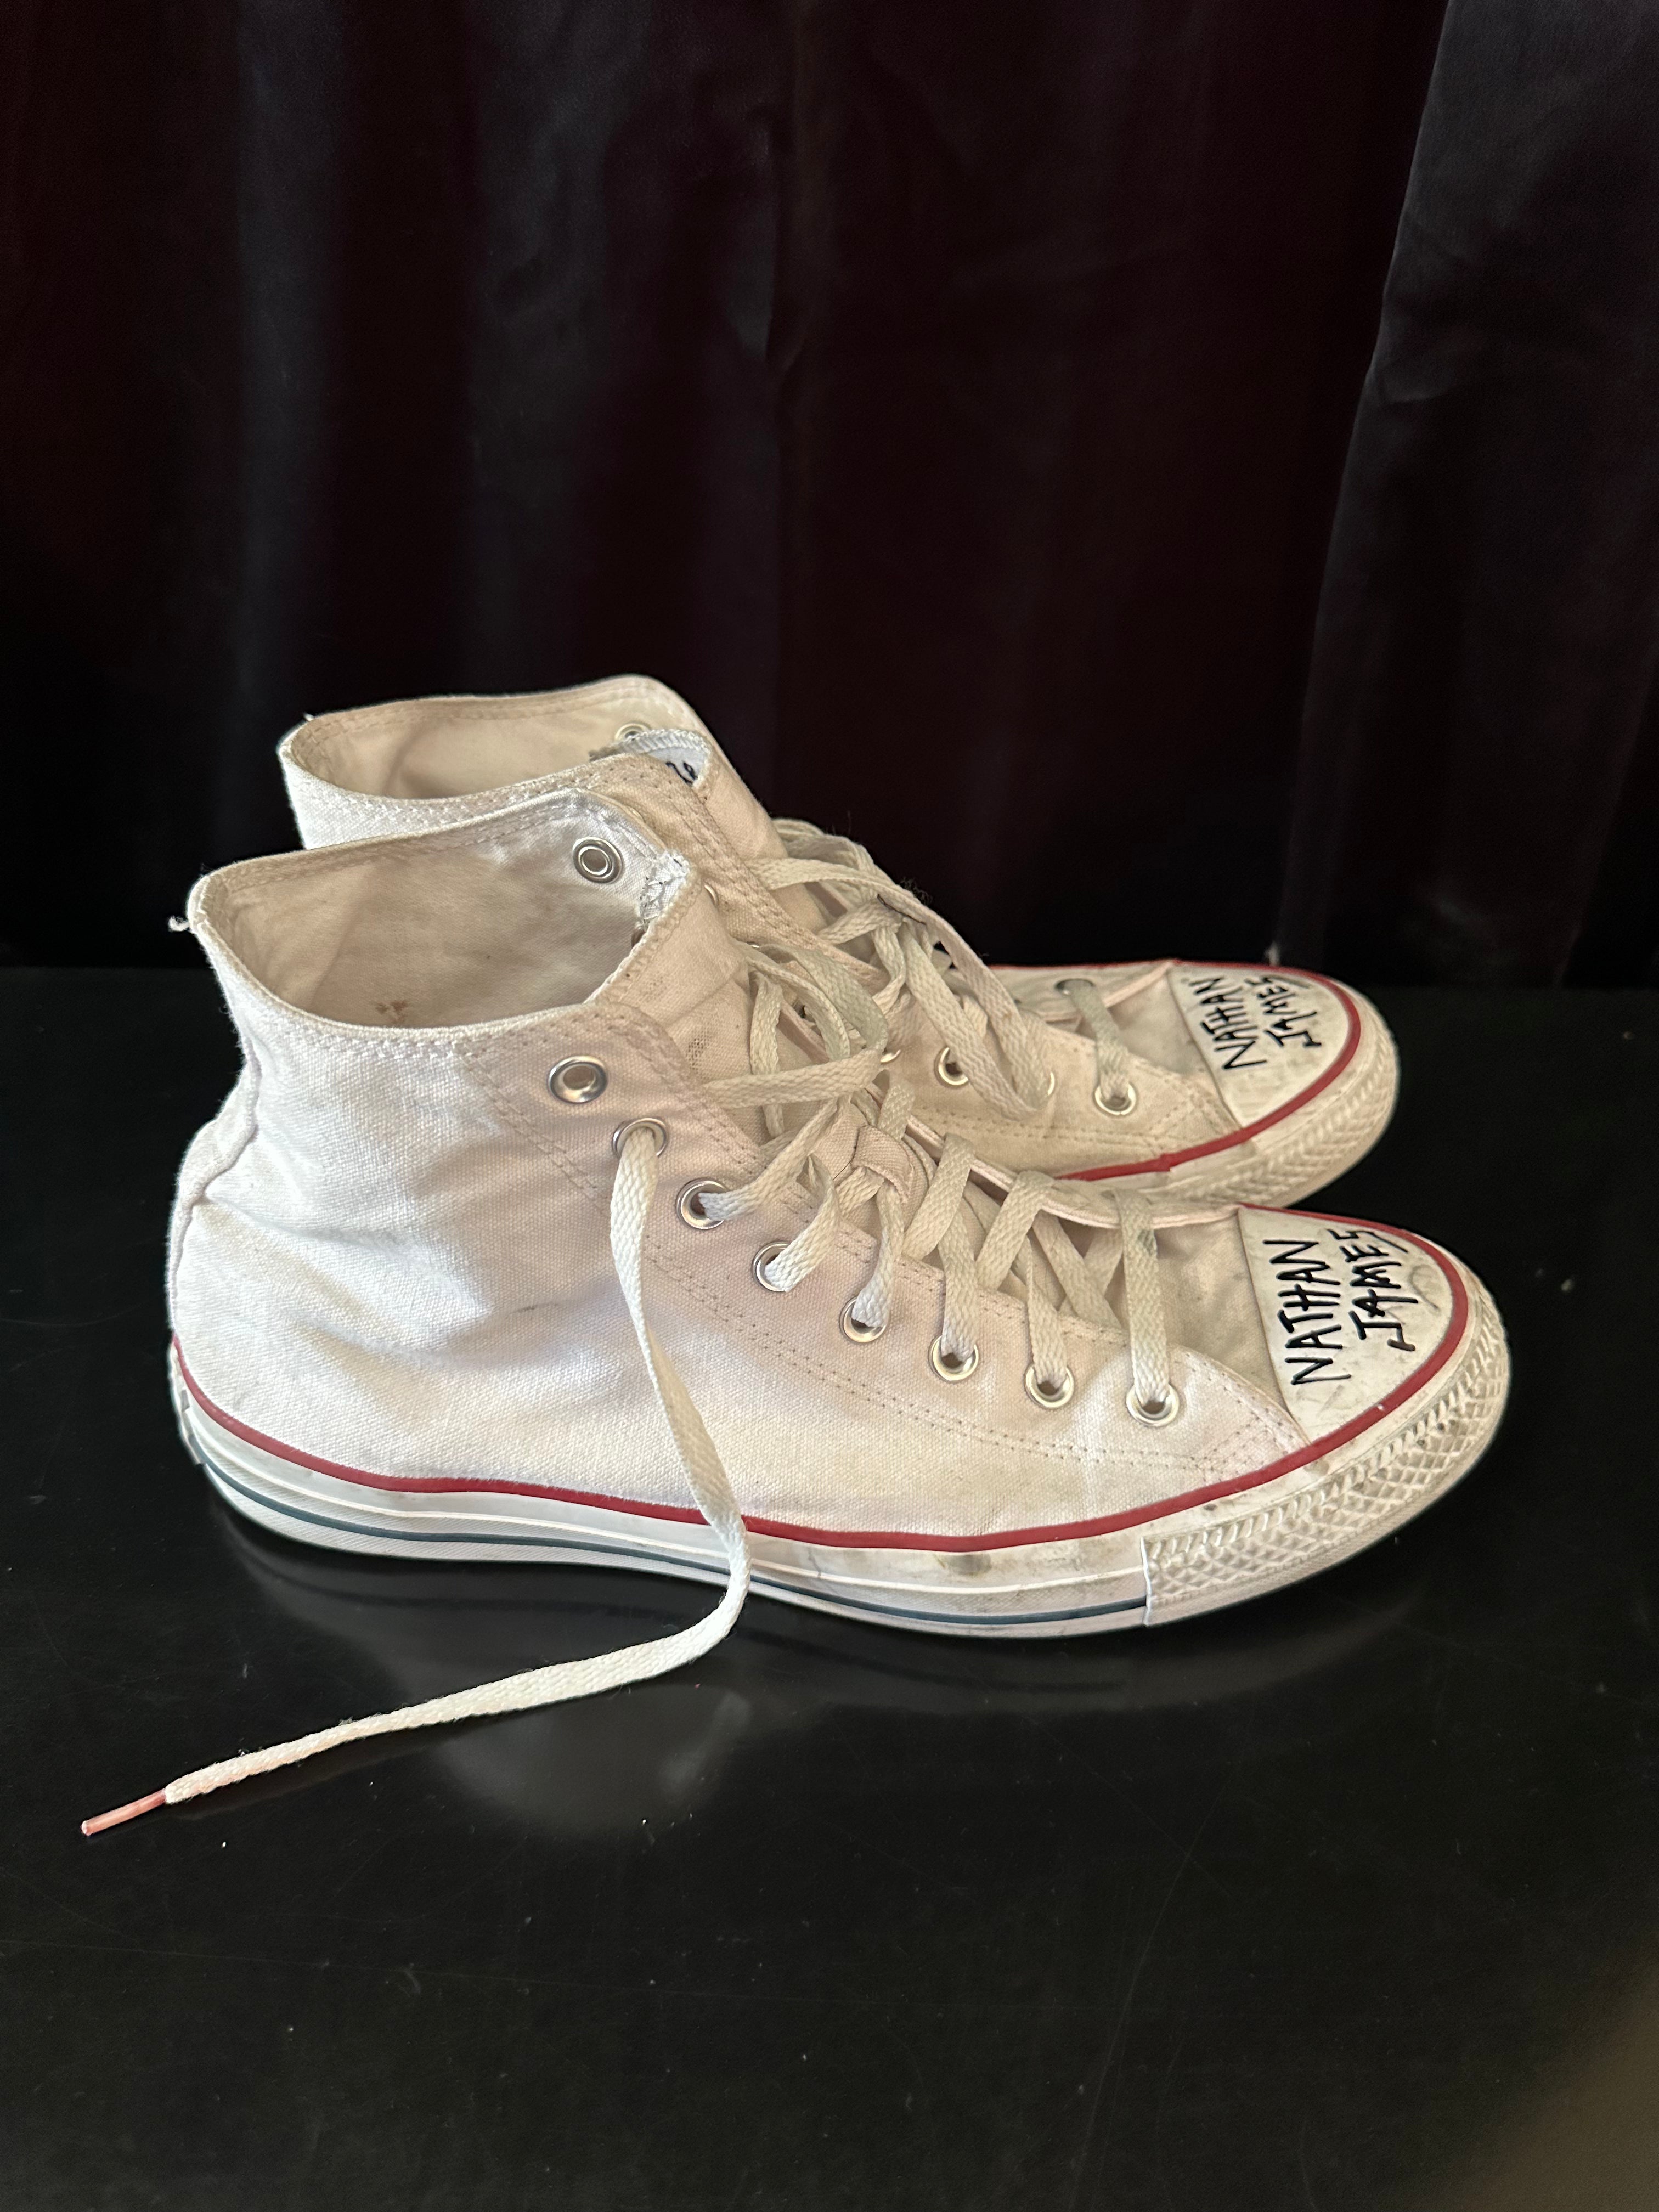 Exclusive: Signed Tour Converse